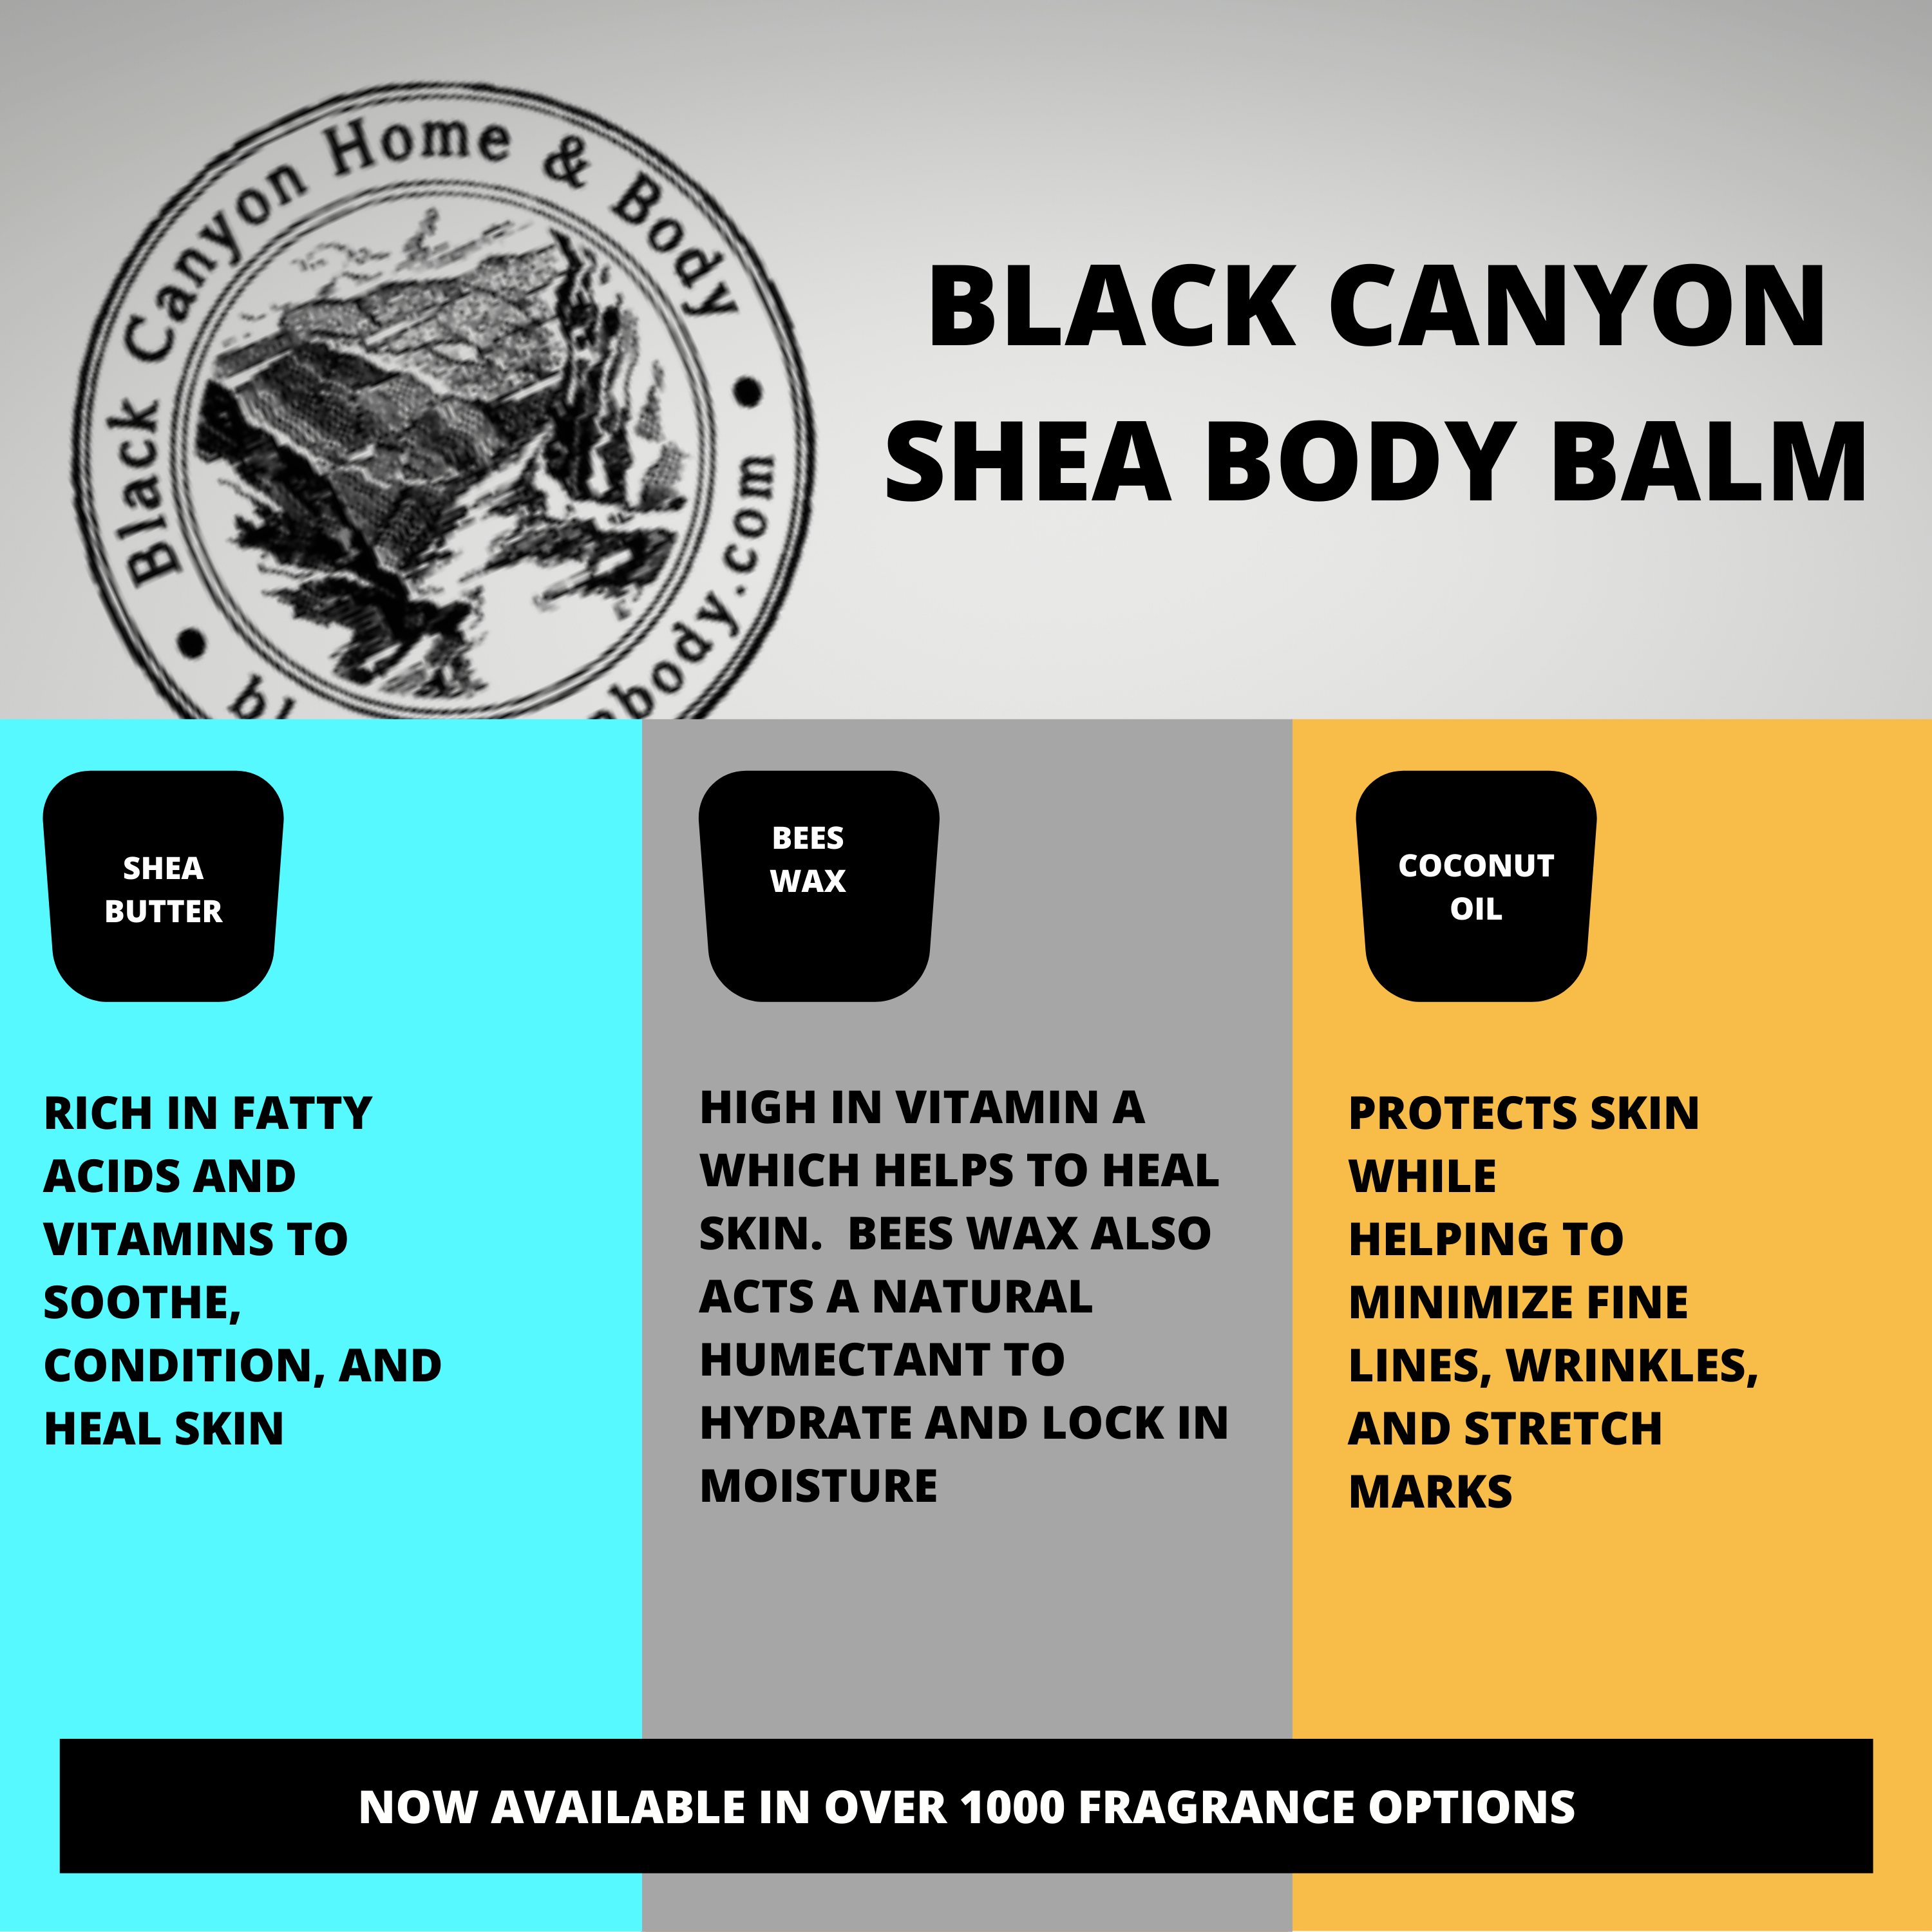 Black Canyon Apple Honey Cider Scented Natural Body Balm with Shea